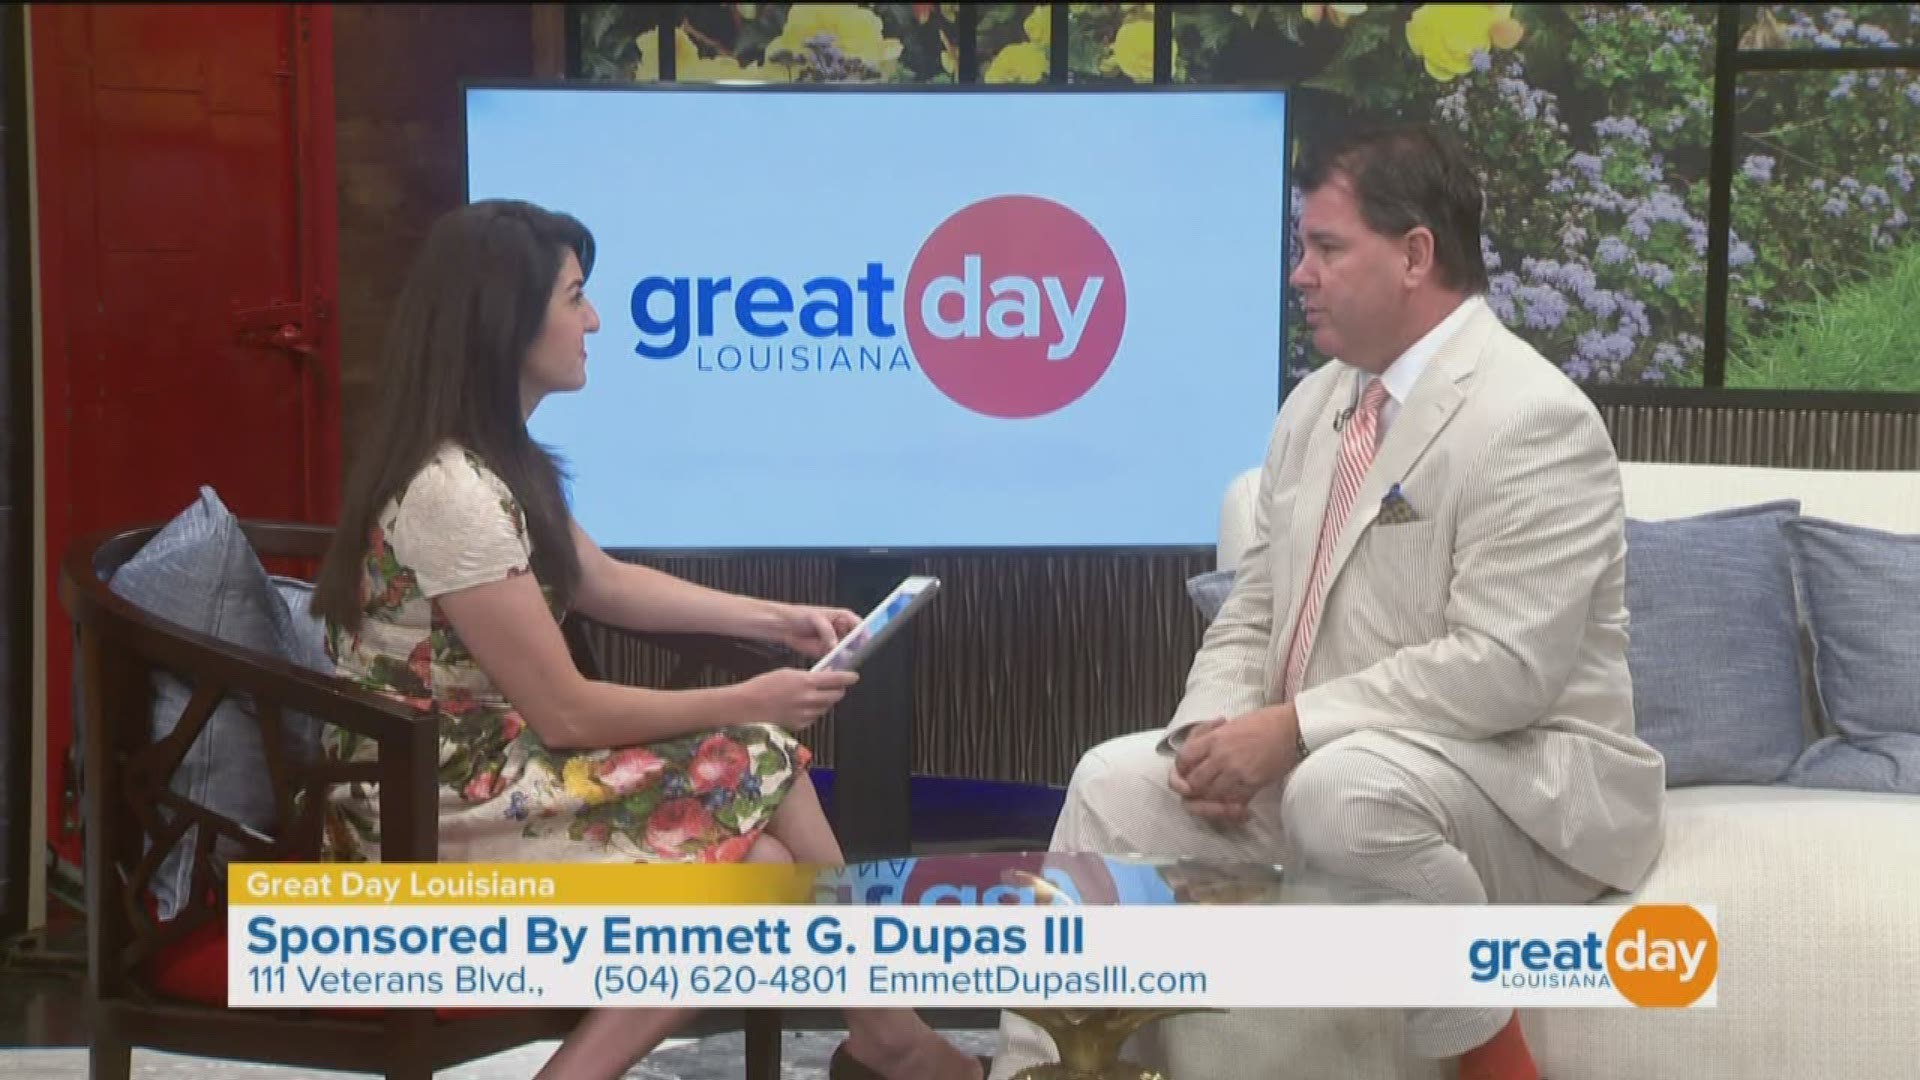 Long-term care planning can help prepare for the costs of various levels of care for chronic conditions in the home, in the community, in alternative care facilities, or in nursing home facilities. Emmett G. Dupas III joins us on Great Day to discuss the importance of having an overall plan for unexpected life events. For more go to EmmettDupasIII.com.